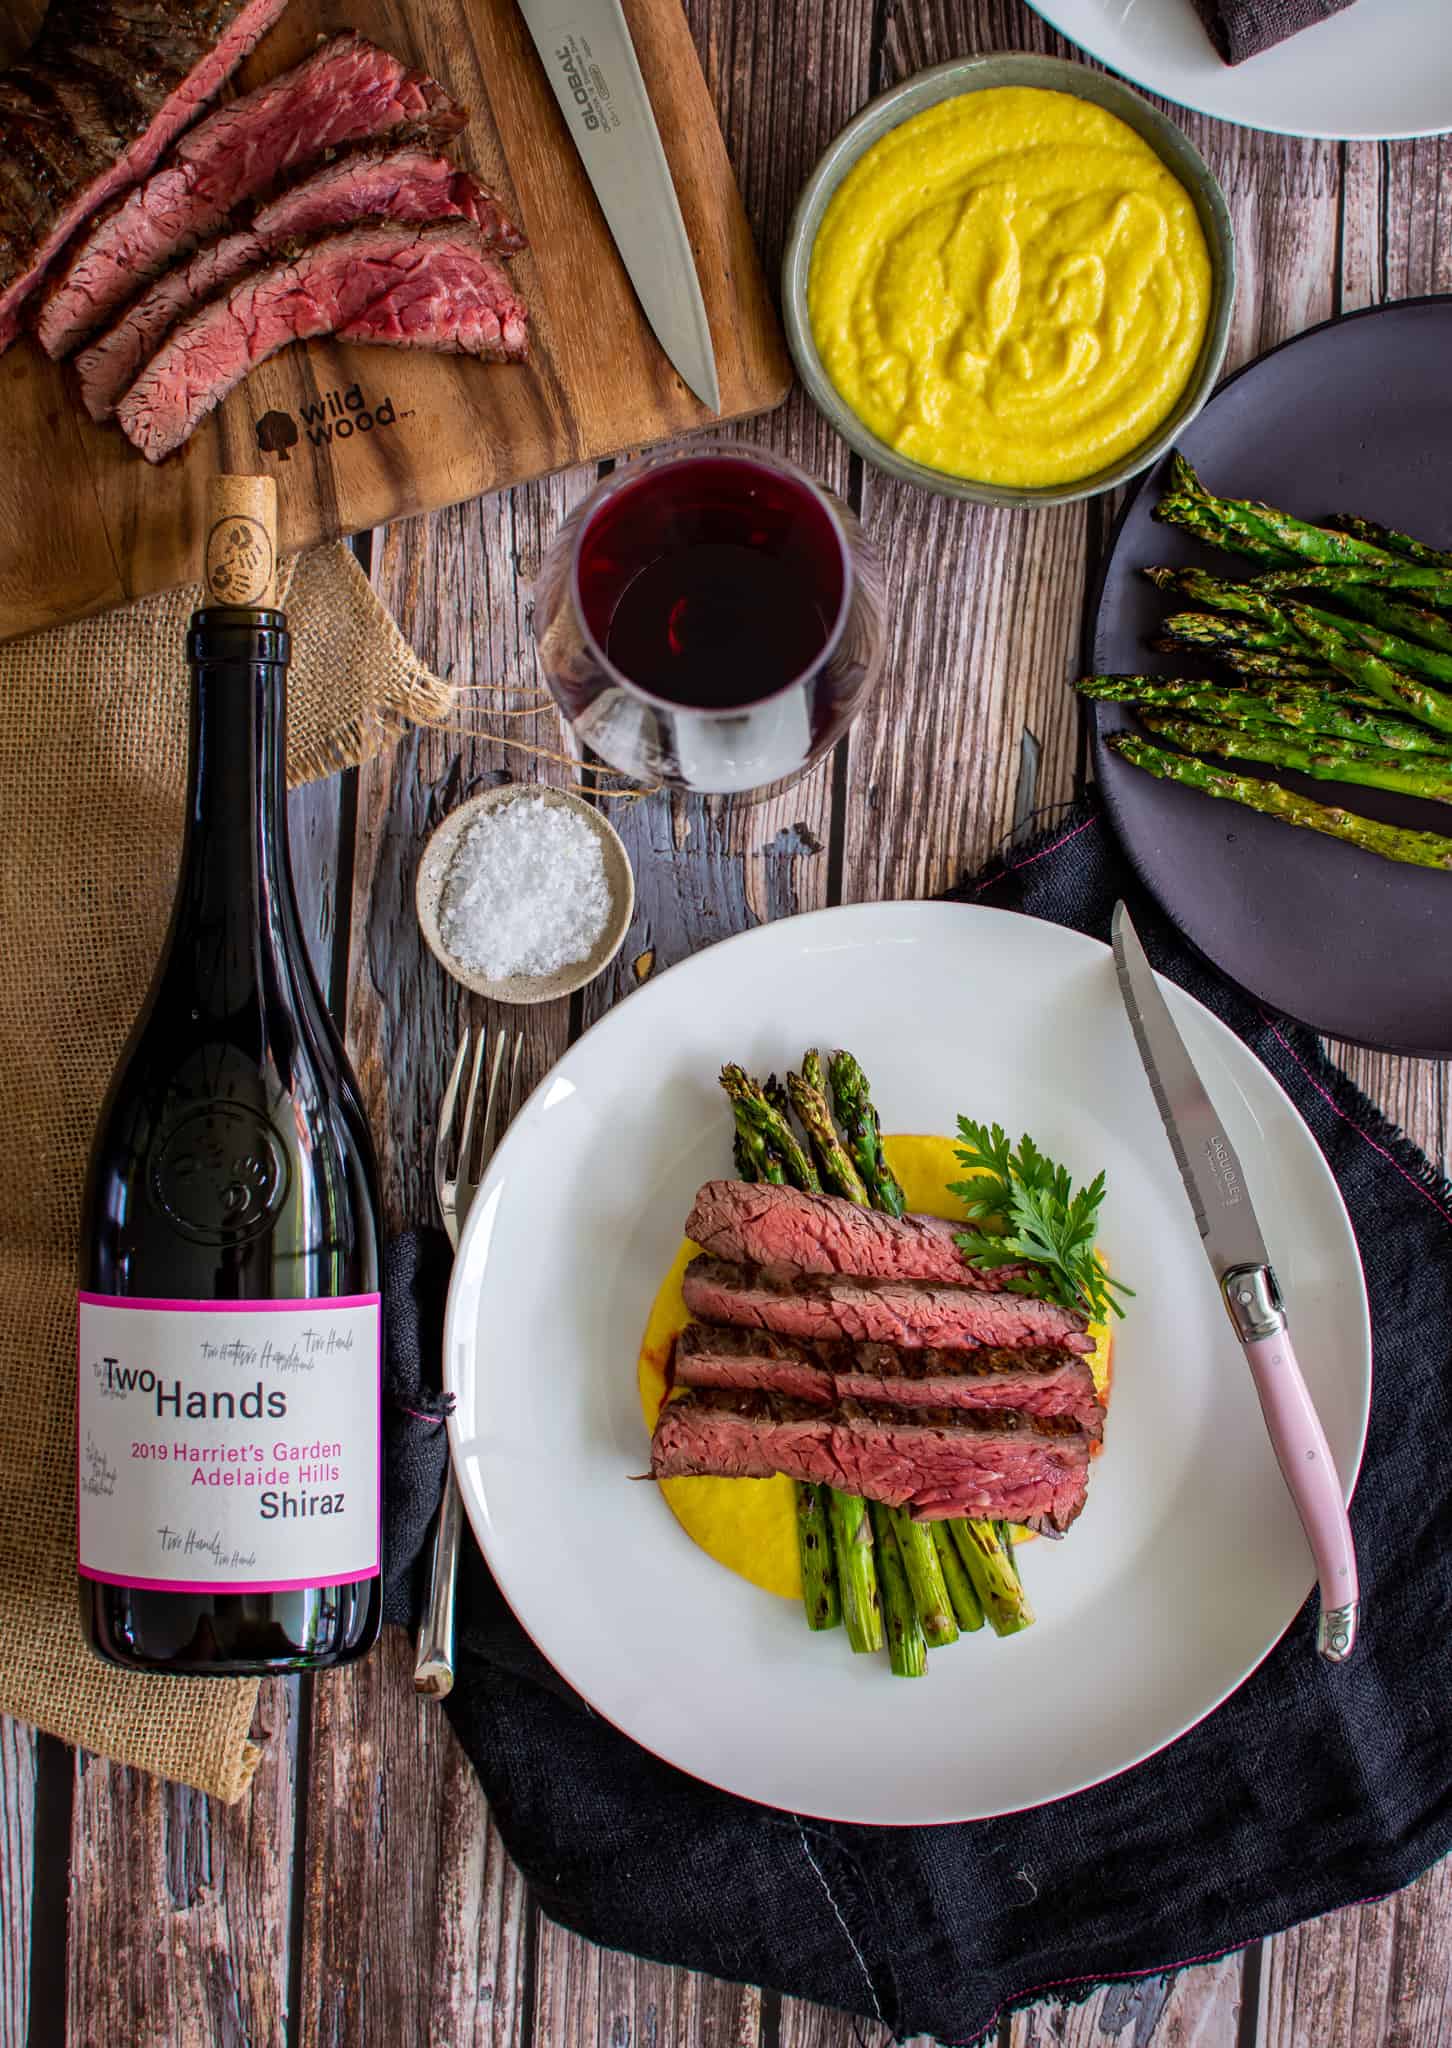 Birdseye view of grilled bavette steak, corn puree and asparagus on a plate. A bottle of Two Hands wine next to plate 